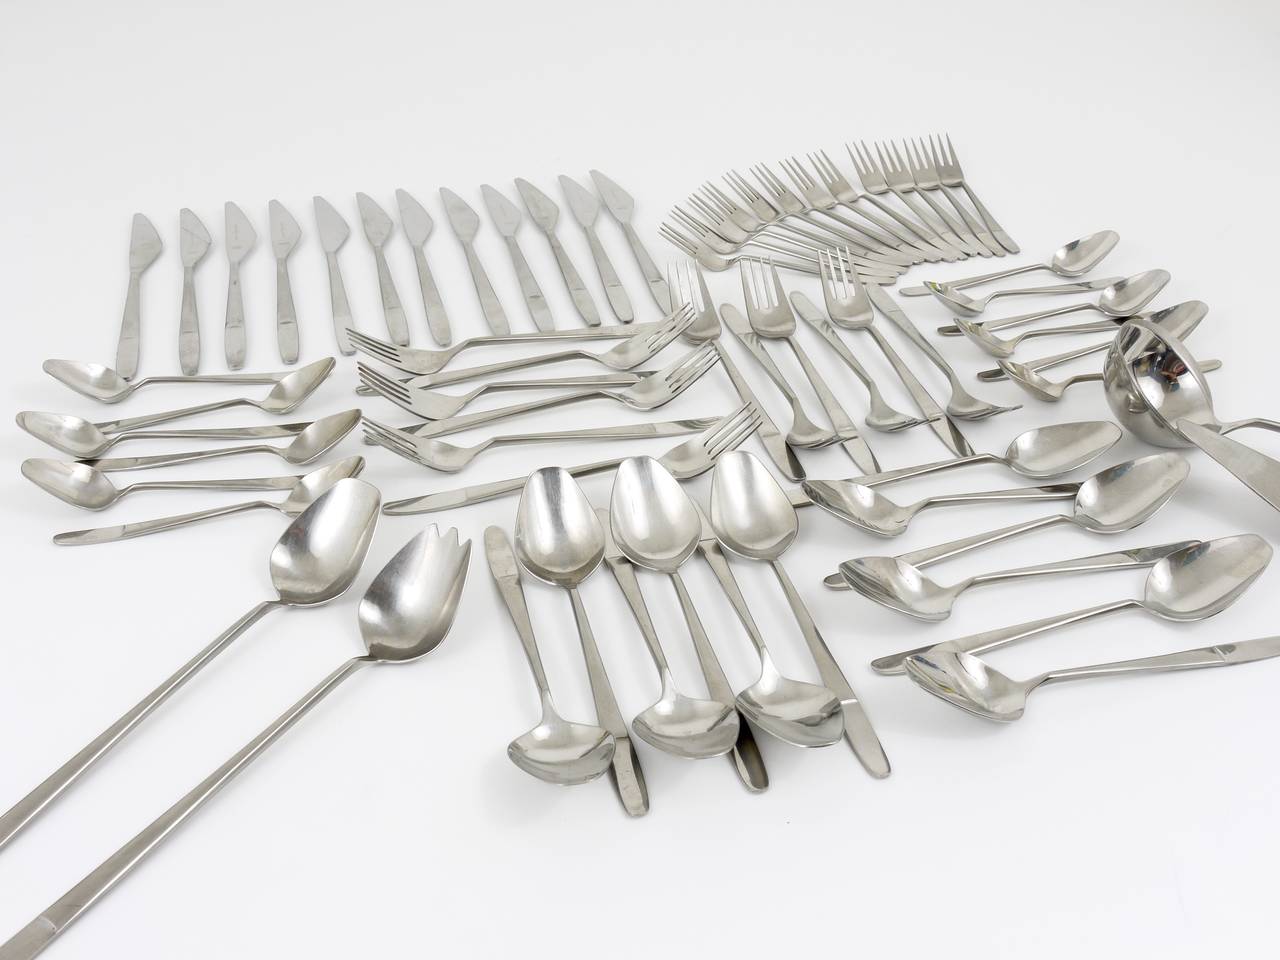 Stainless Steel Amboss Austria 2070 Flatware Cutlery for 12 Persons by Helmut Alder, 1960s